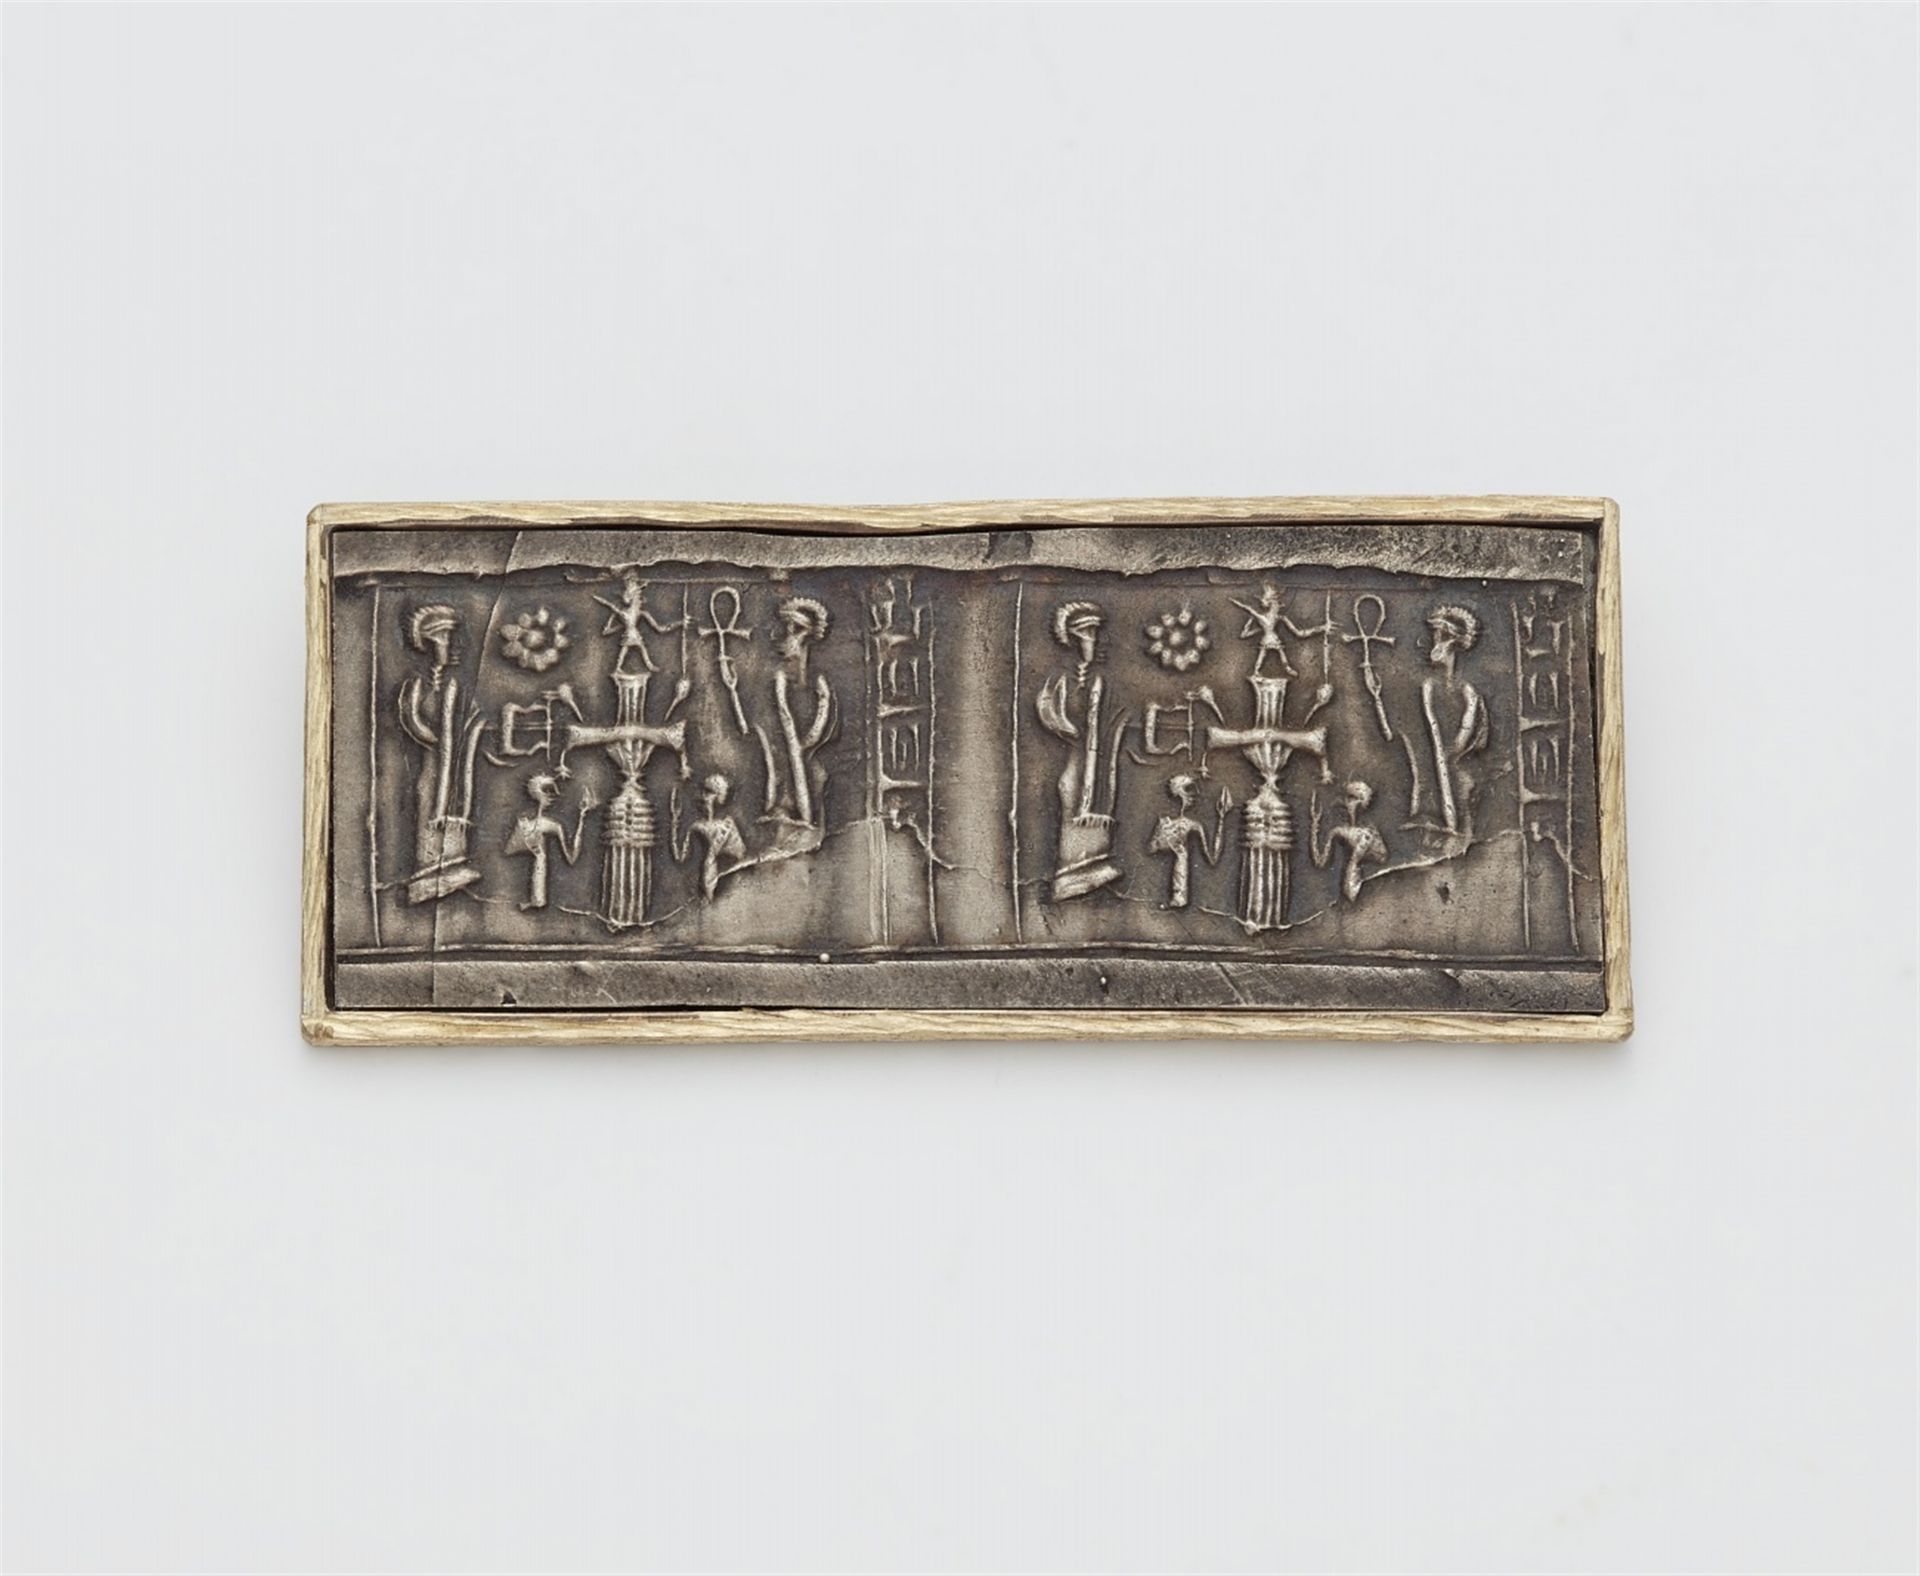 A parcel gilt silver brooch with a cylinder seal impression